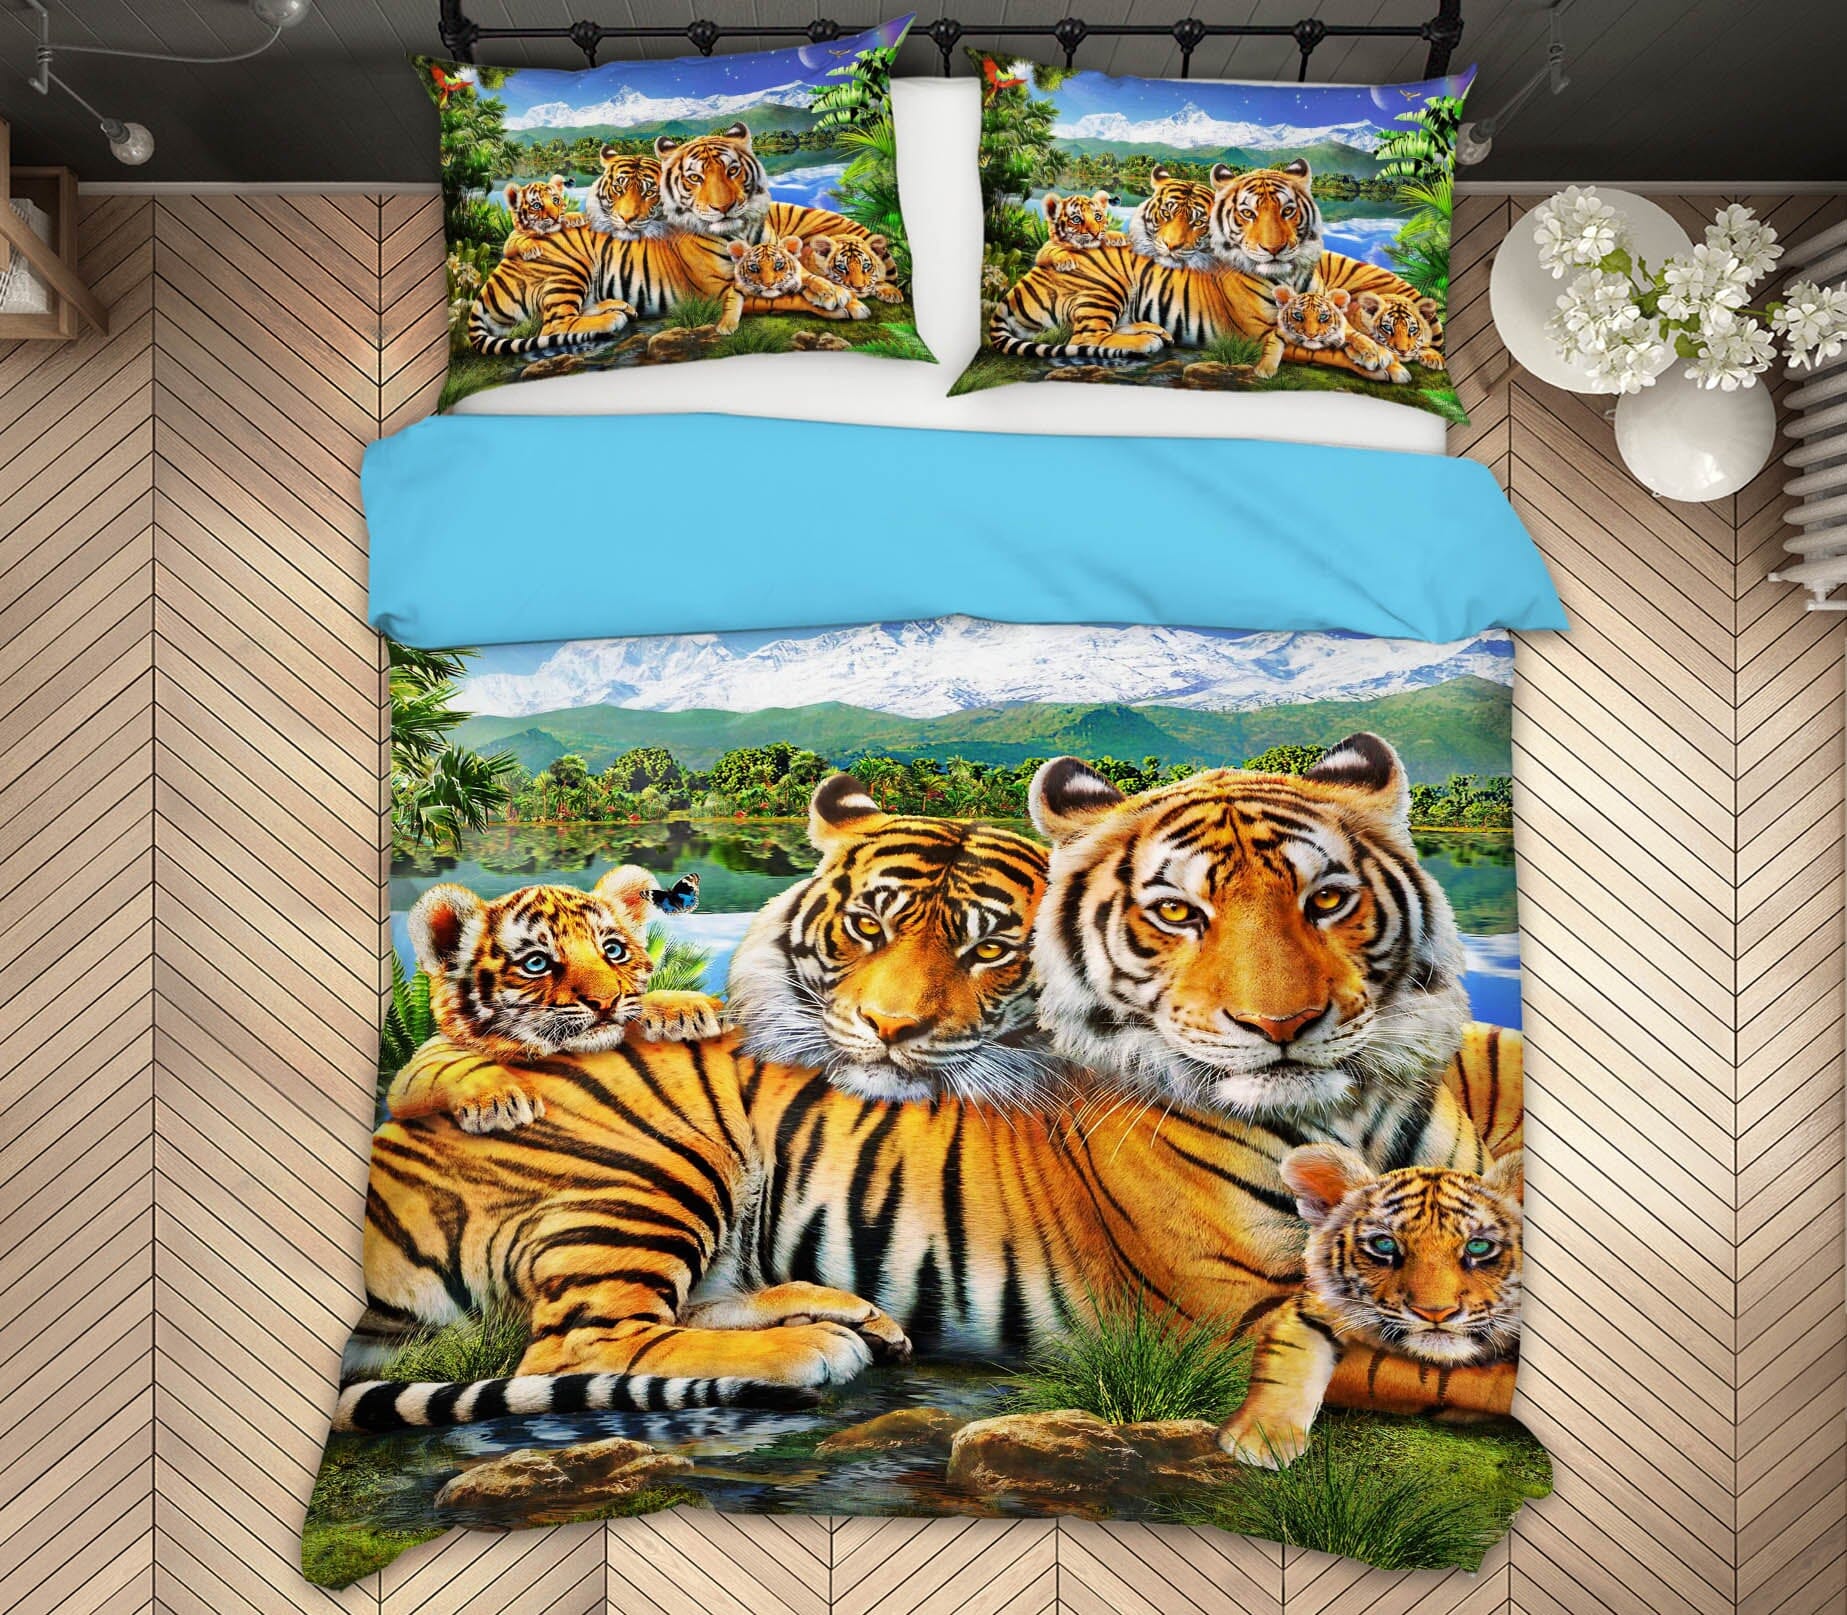 3D Loving Tigers 2121 Adrian Chesterman Bedding Bed Pillowcases Quilt Quiet Covers AJ Creativity Home 